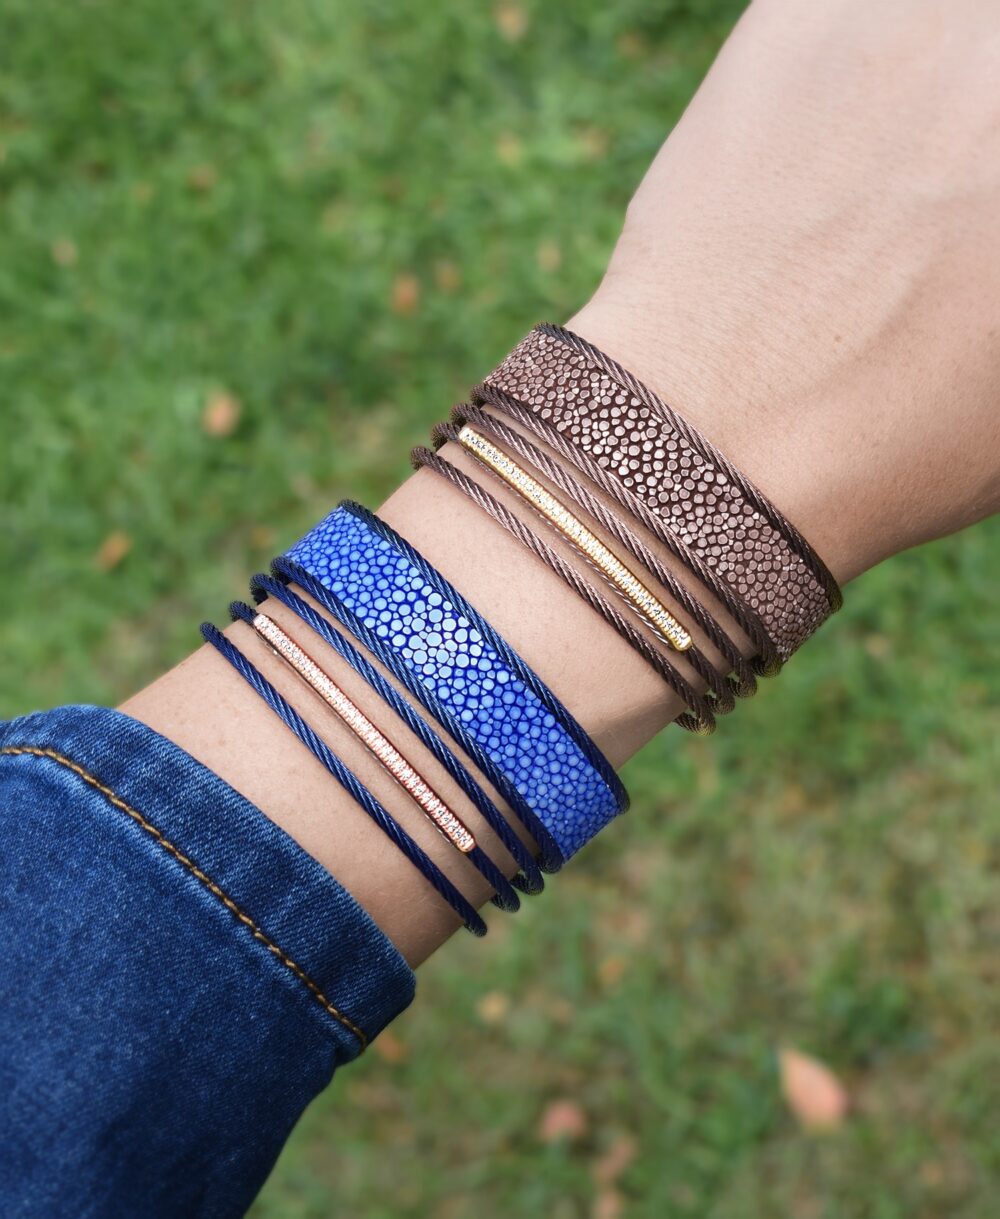 Blueberry Cable Stacked Wide Open Cuff with Blue Stingray and Diamonds